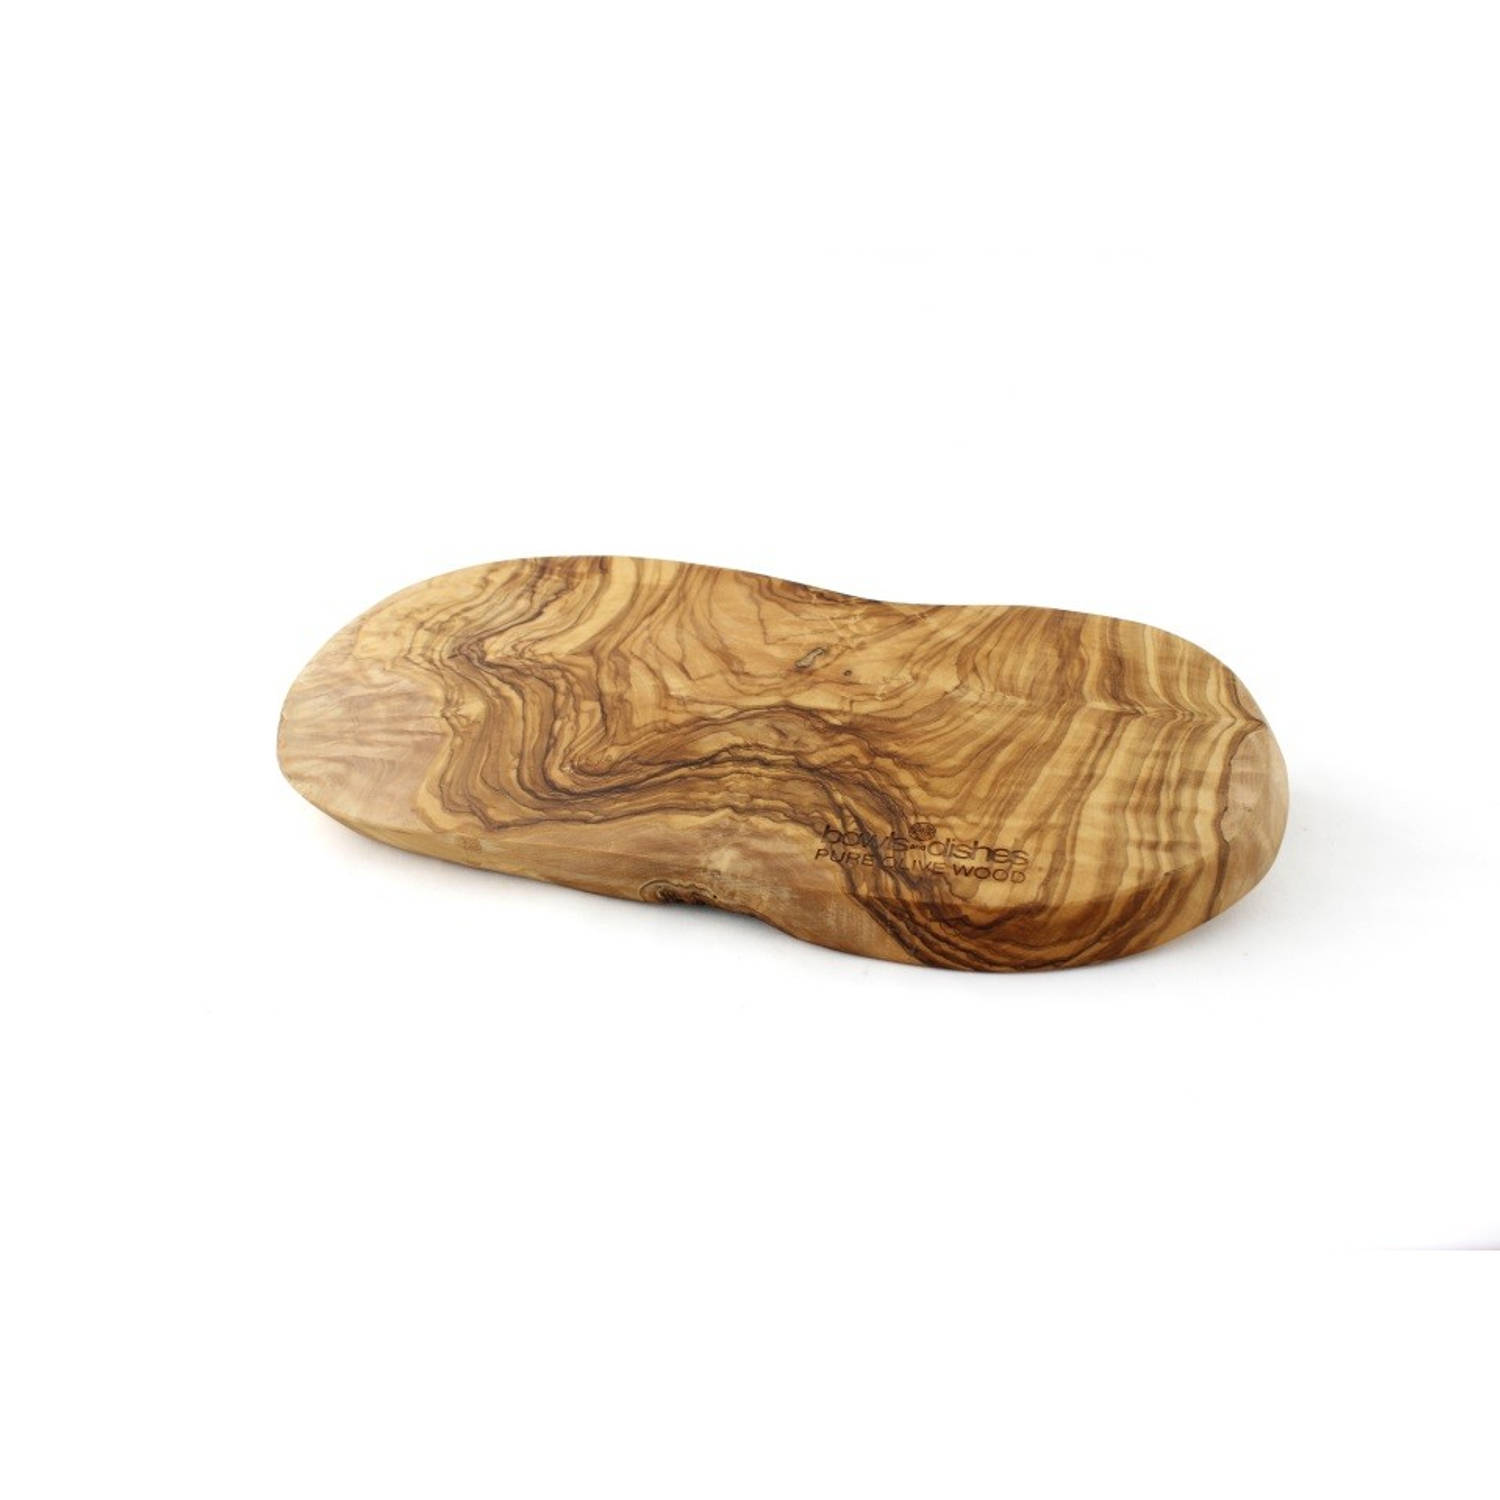 Bowls and Dishes Pure Olive Wood Tapasplank - Olijfhout 35cm